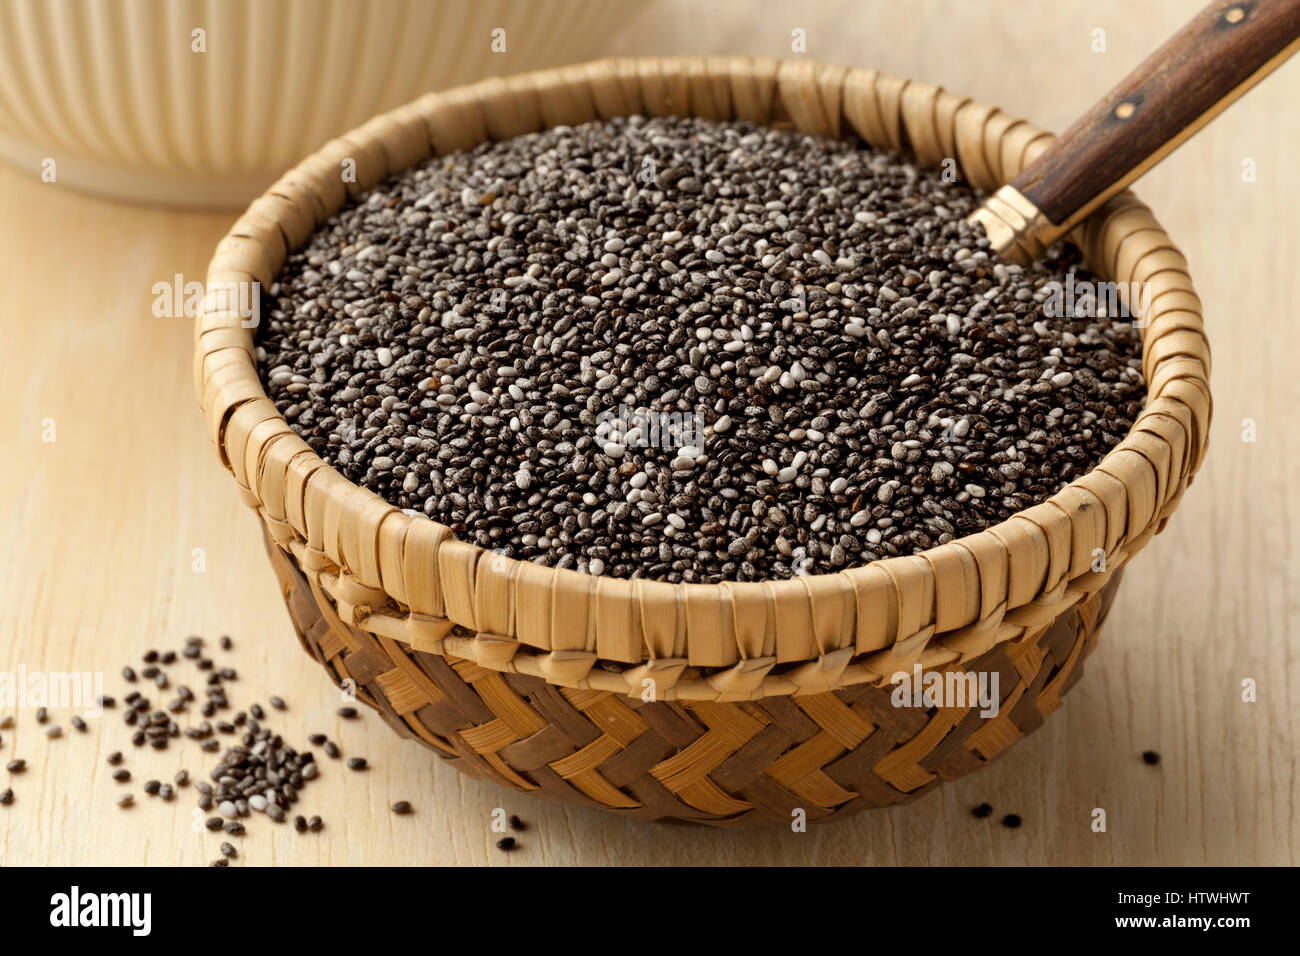 Raw chia seeds in a basket Stock Photo